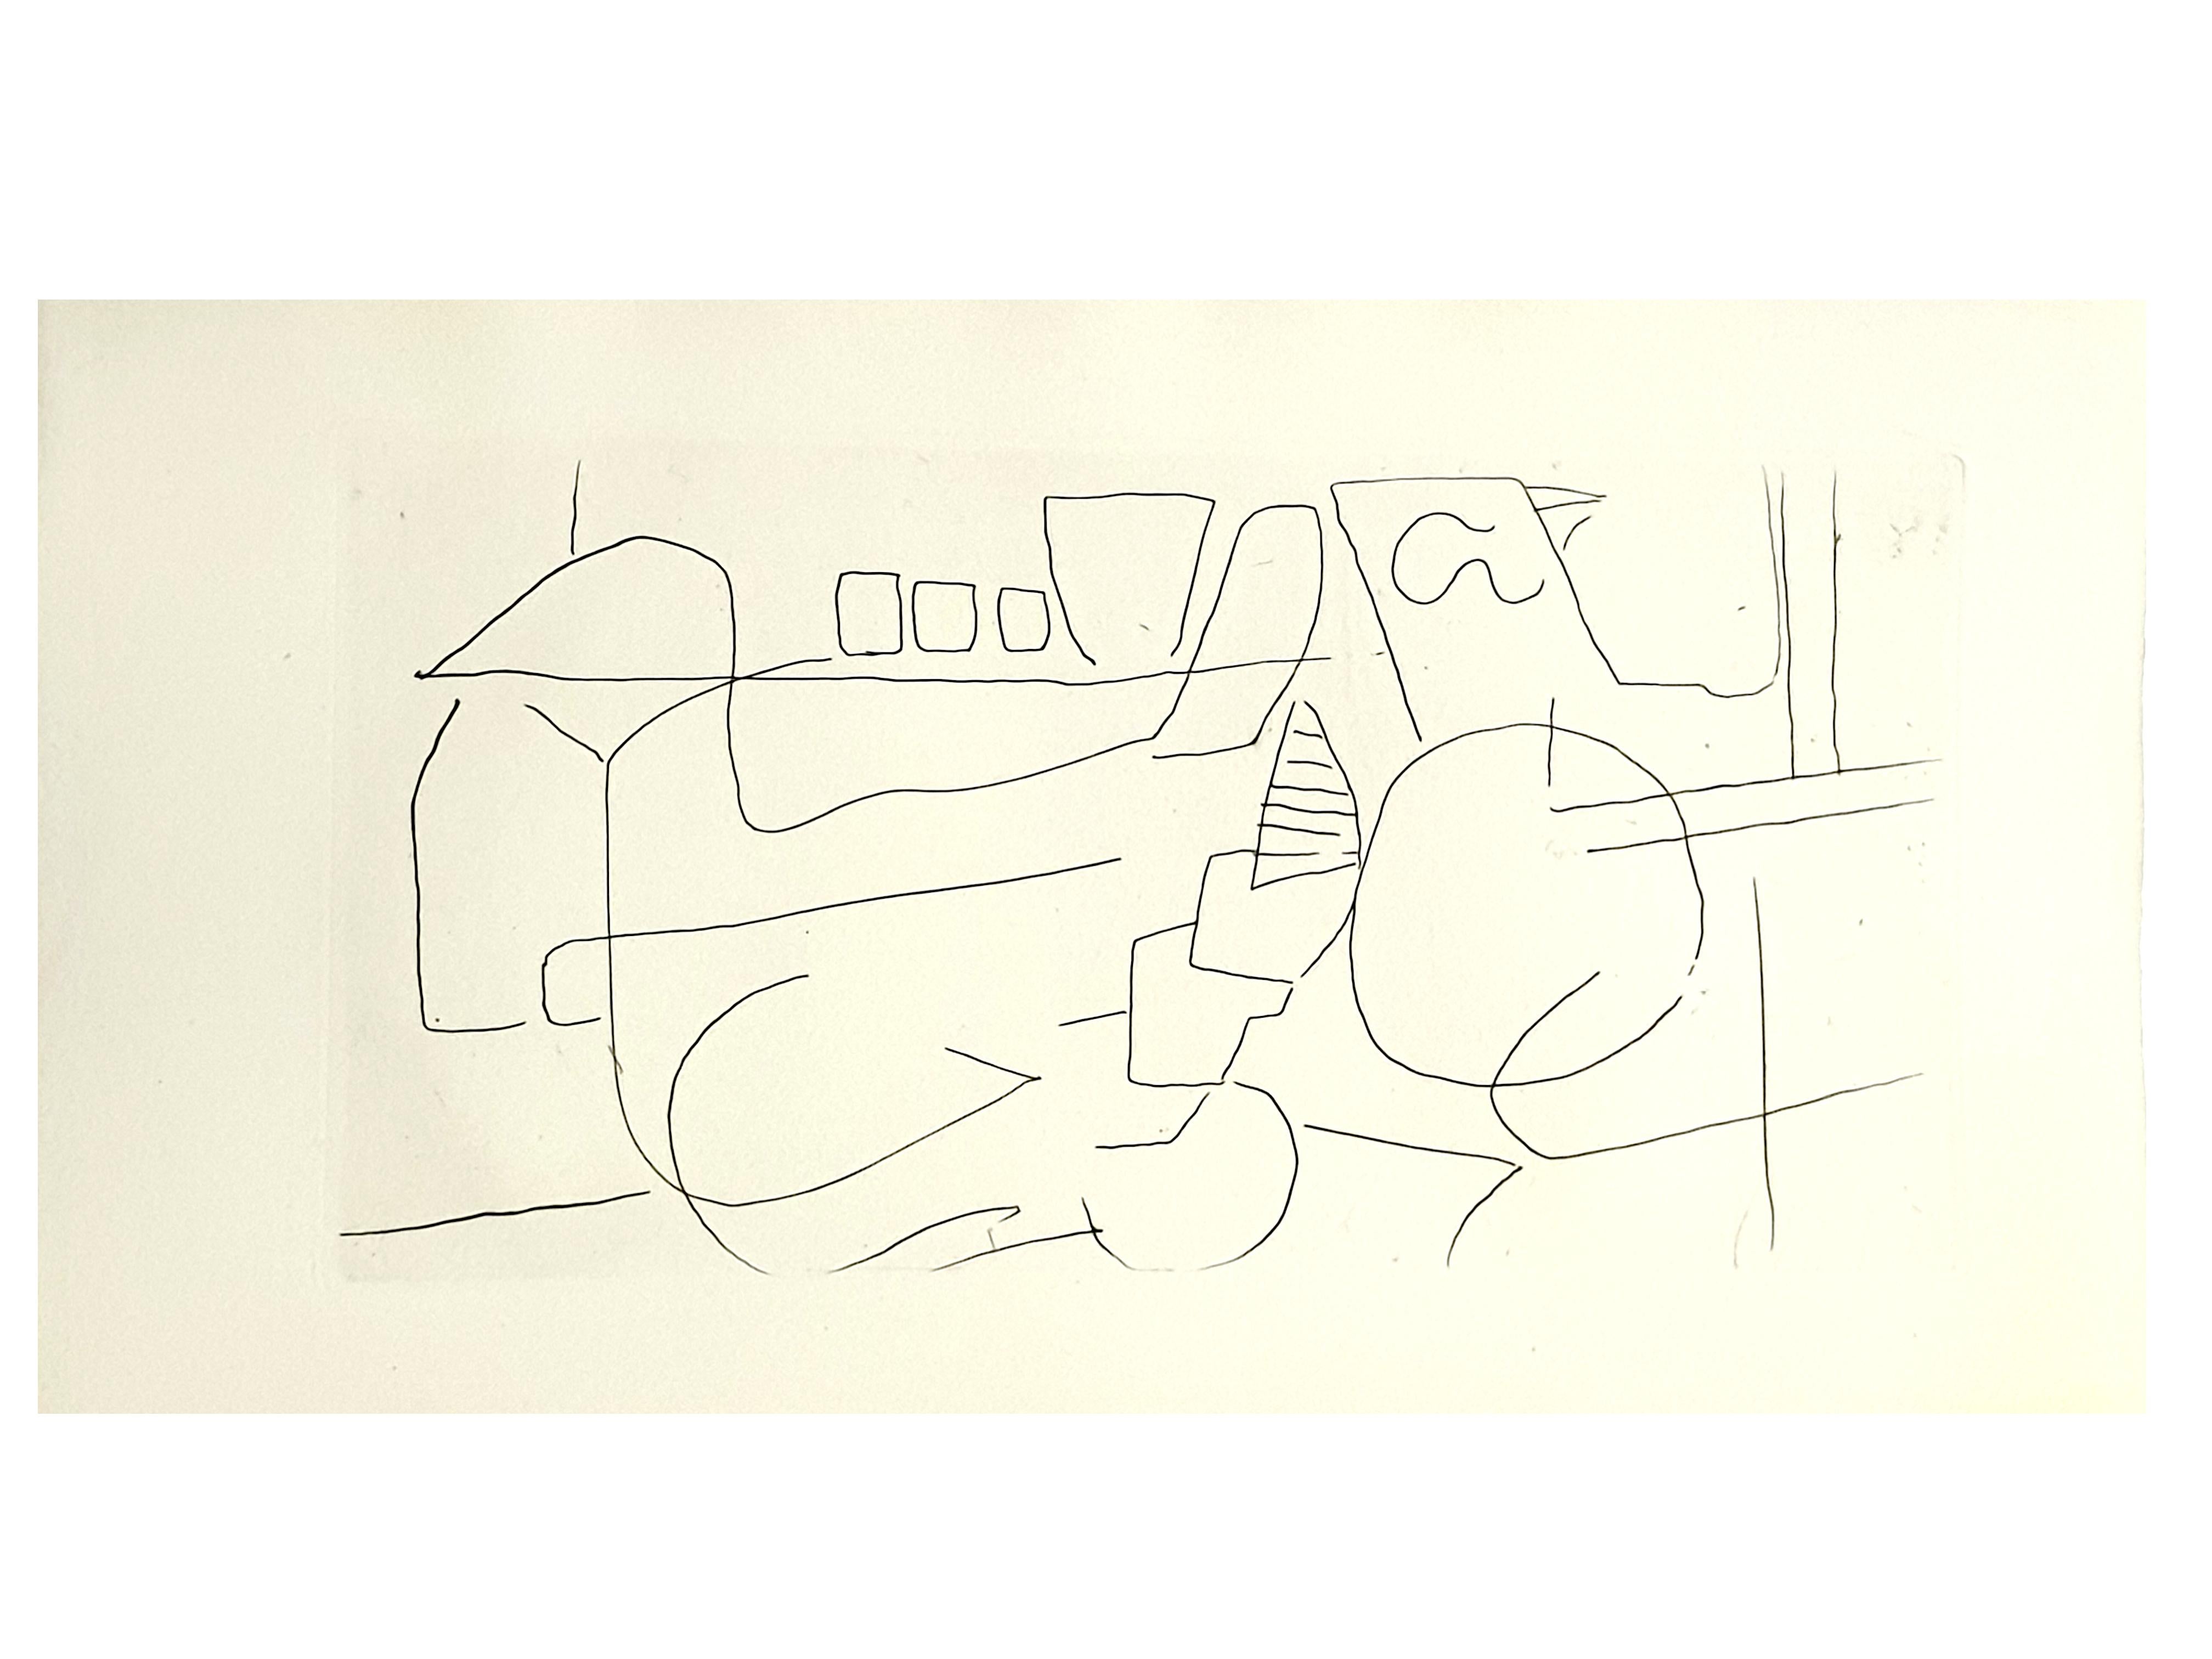 André Lanskoy - Composition - Original Etching
From Dédale
Edition: 190
Dimensions: 32 x 18 cm
This etching is from the first series of etching Lanskoy made. 
Unsigned and unumbered as issued